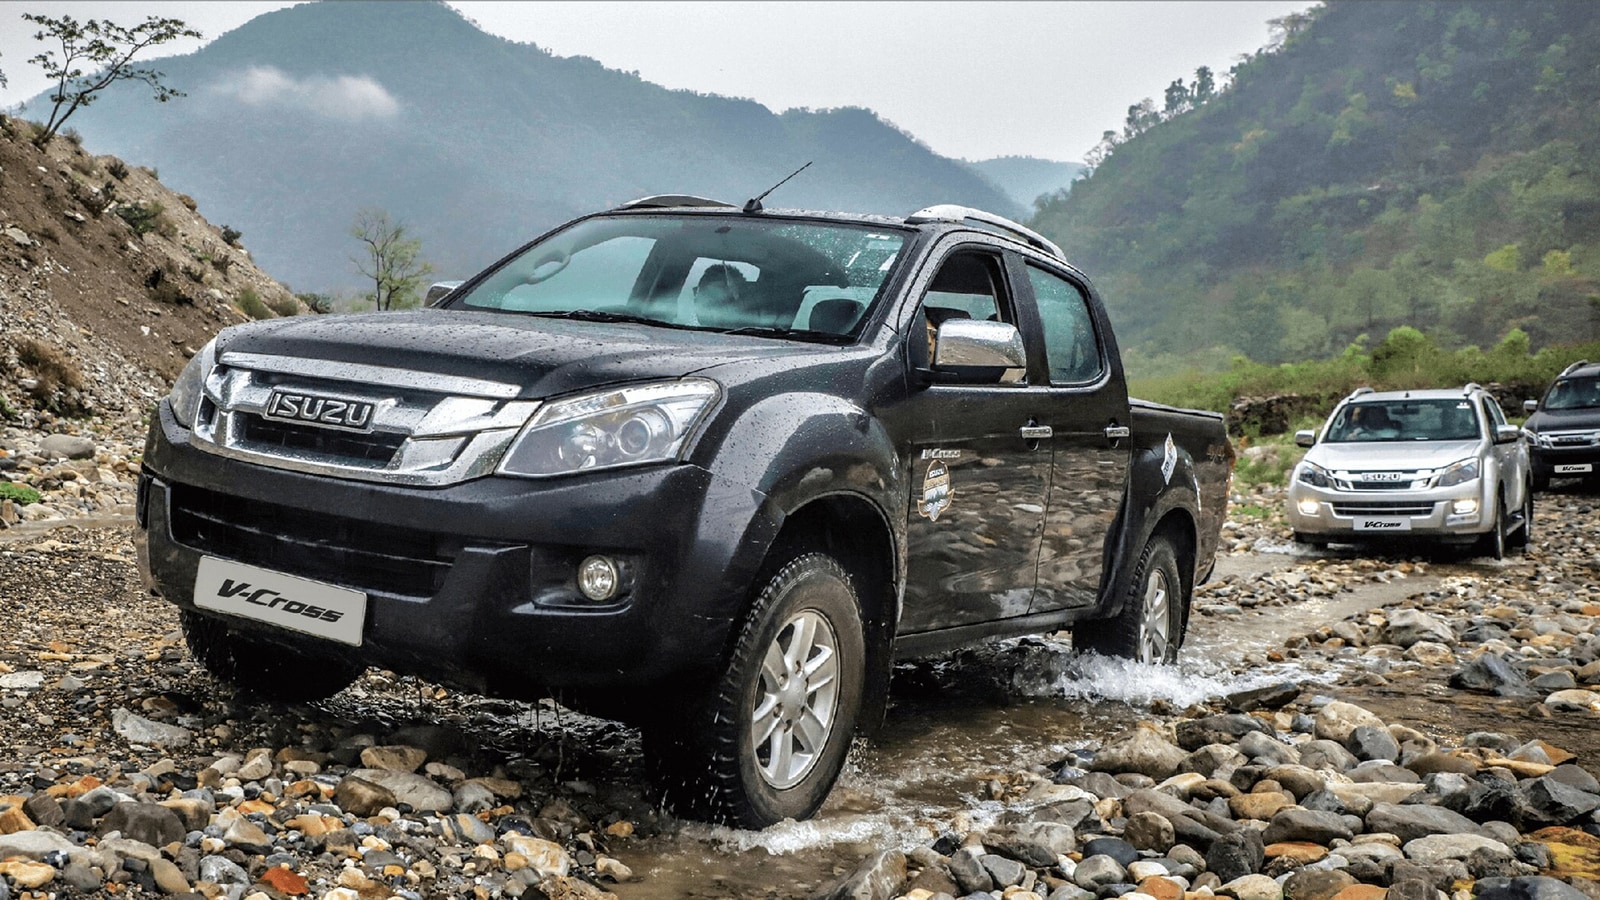 Isuzu launches I-Care Pre-Summer Service Camp for D-MAX V-Cross